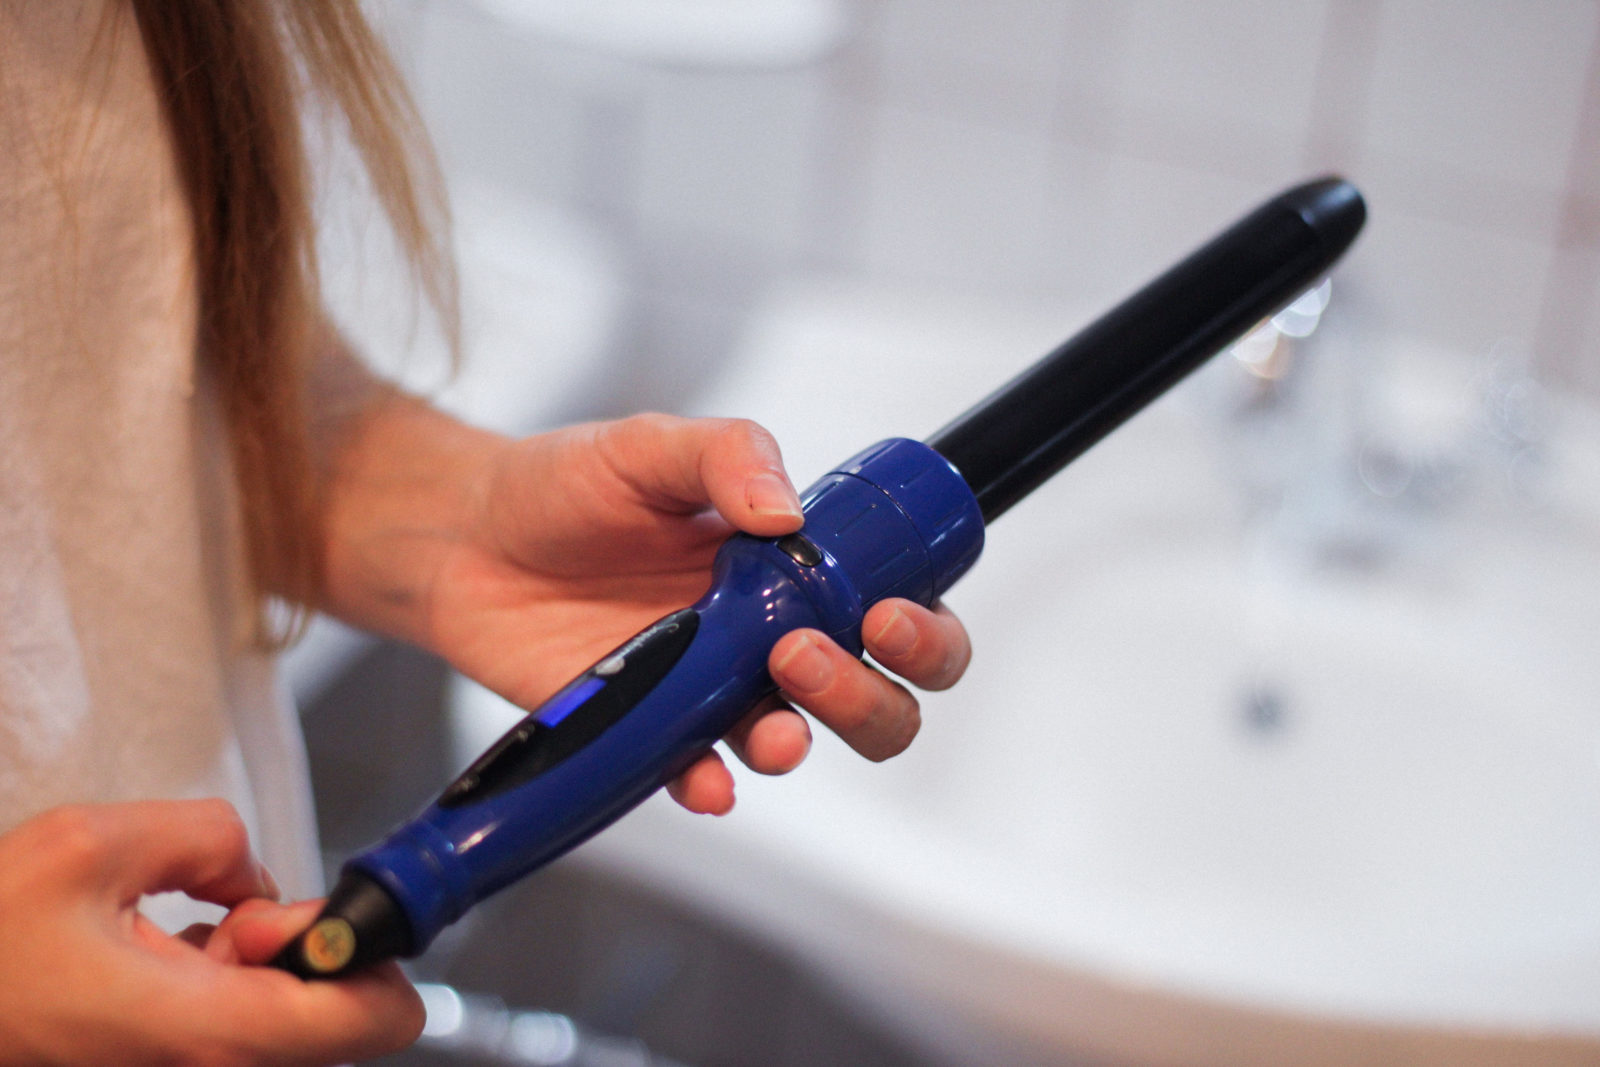 curling iron sapphire irresistible me